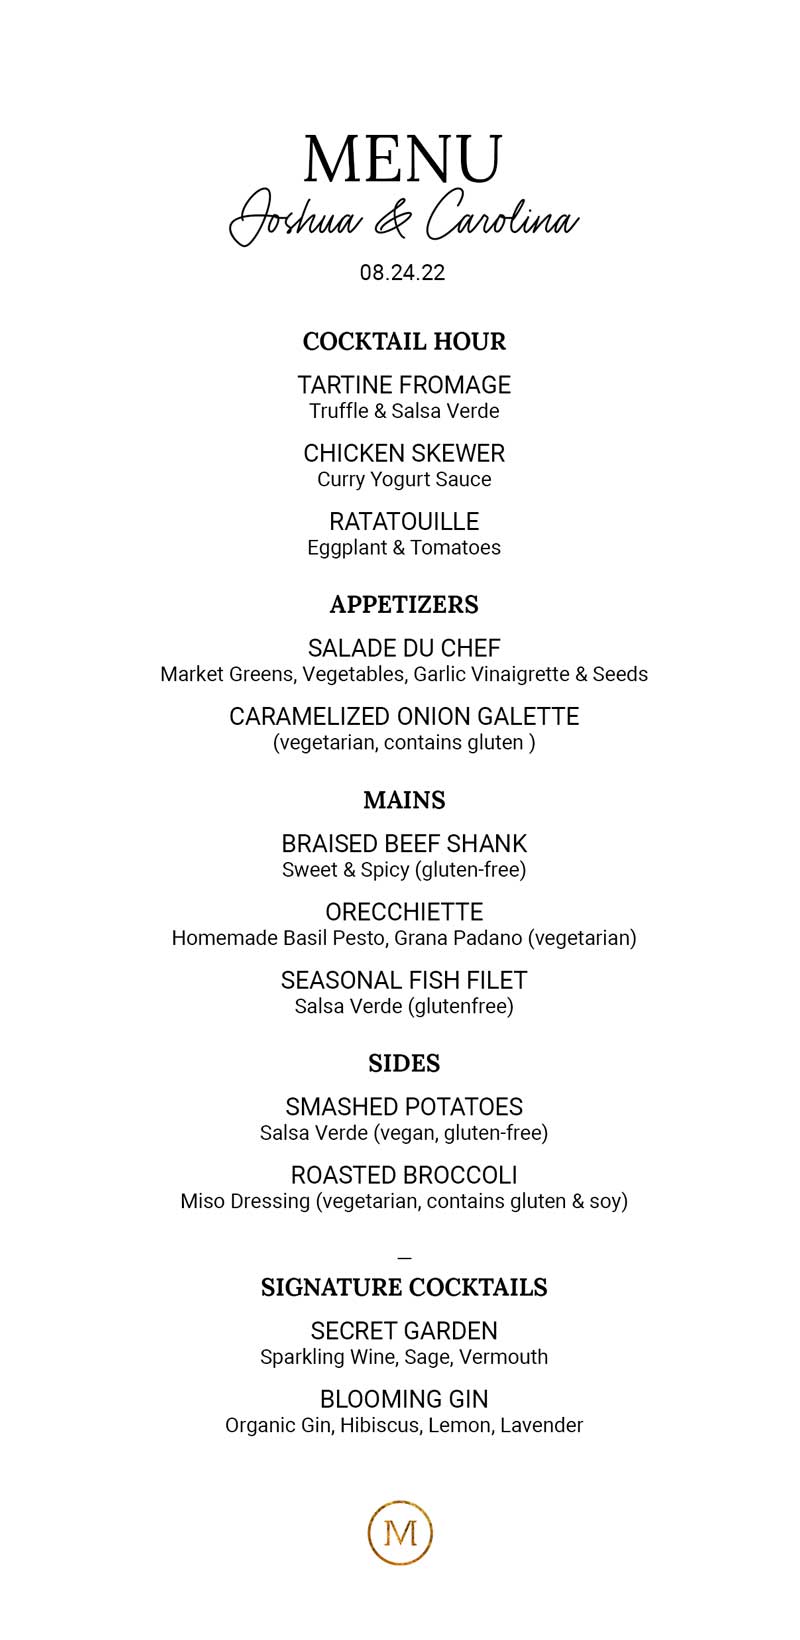 Sample Event menu for a dinner party at Maison May.